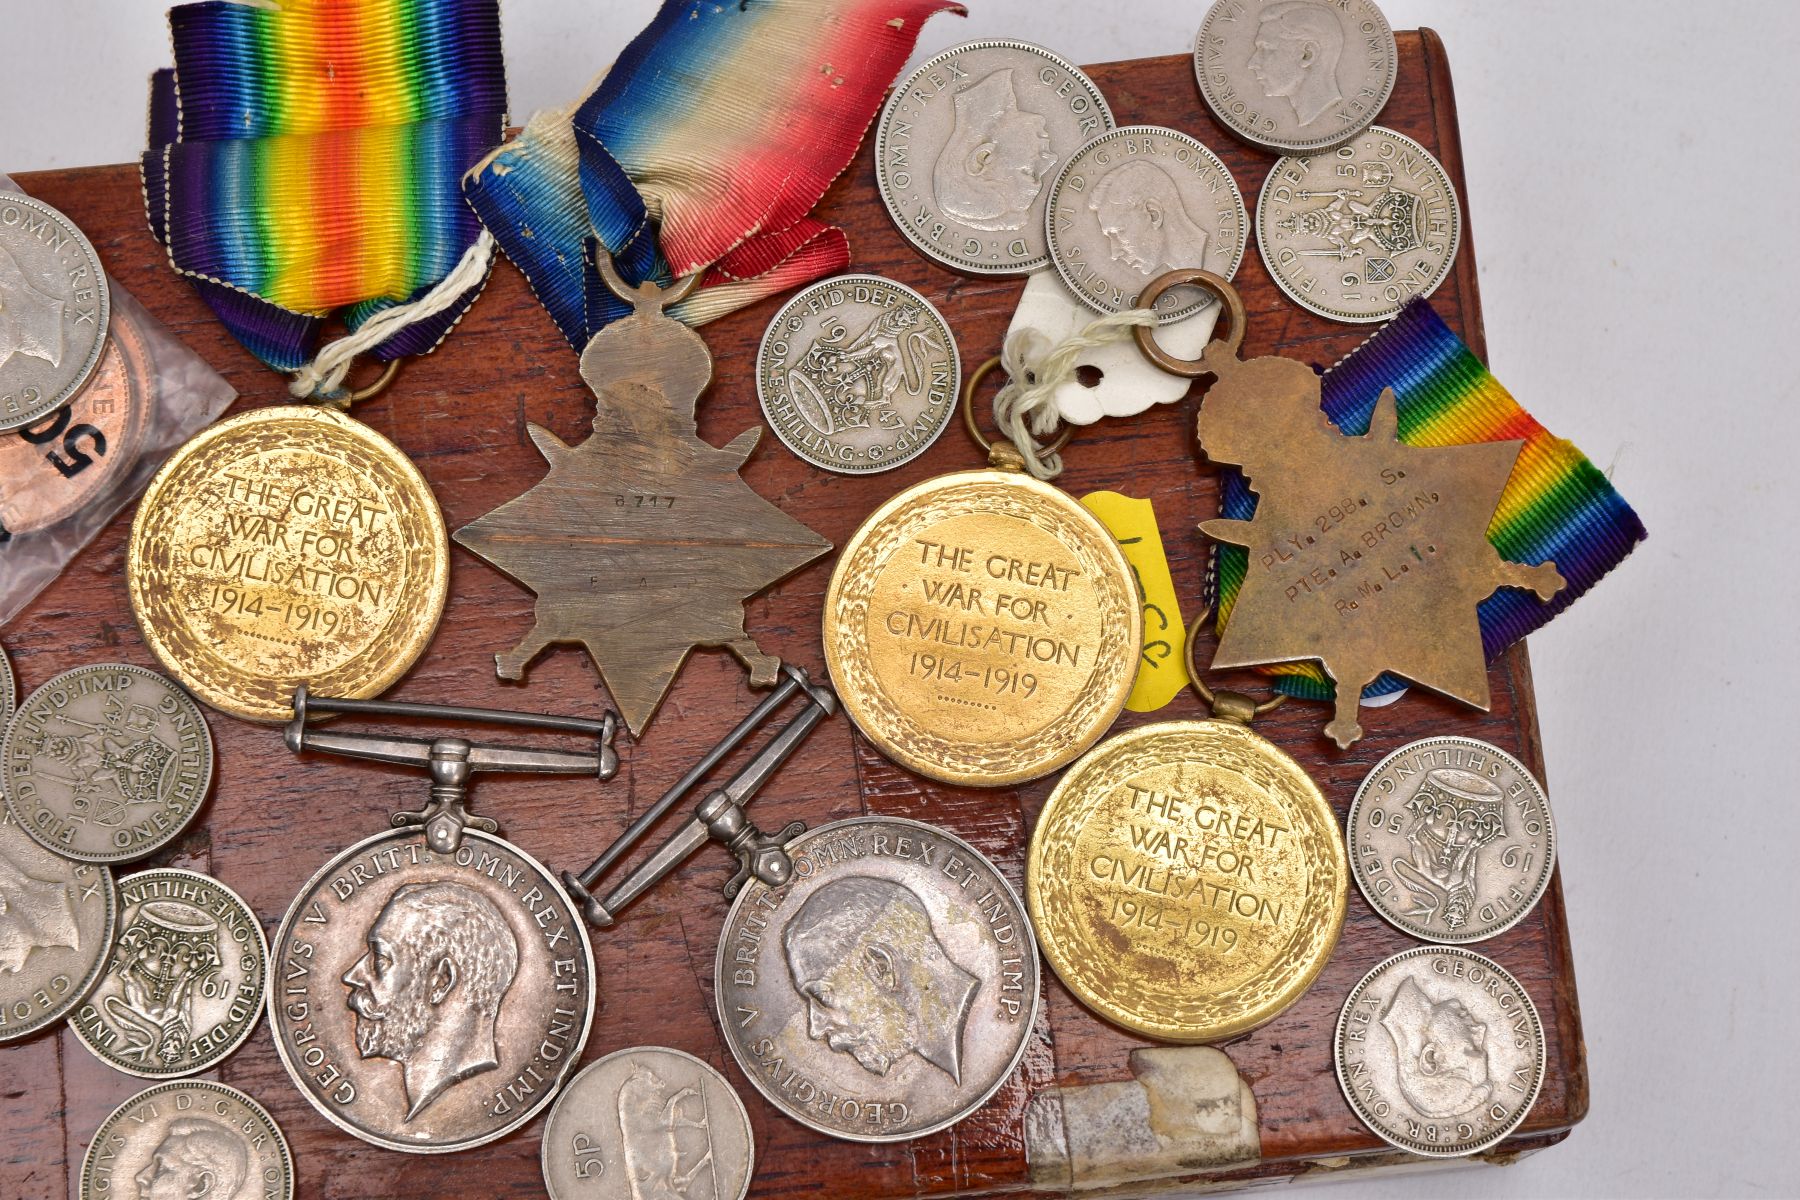 A BOX CONTAINING SOME BRITISH COINAGE AND MEDALS GROUPS comprising British War & Victory medal, pair - Image 3 of 4